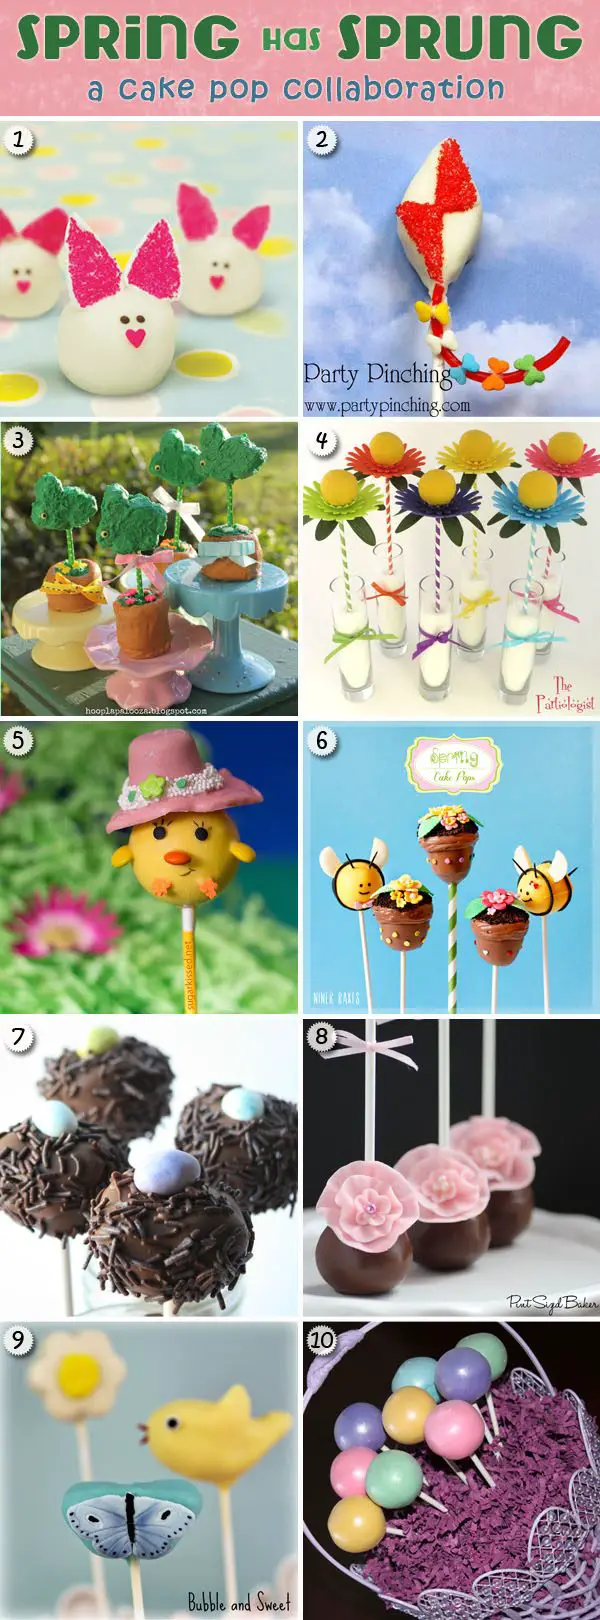 Springtime Cake Pop Nests, Lay The Table